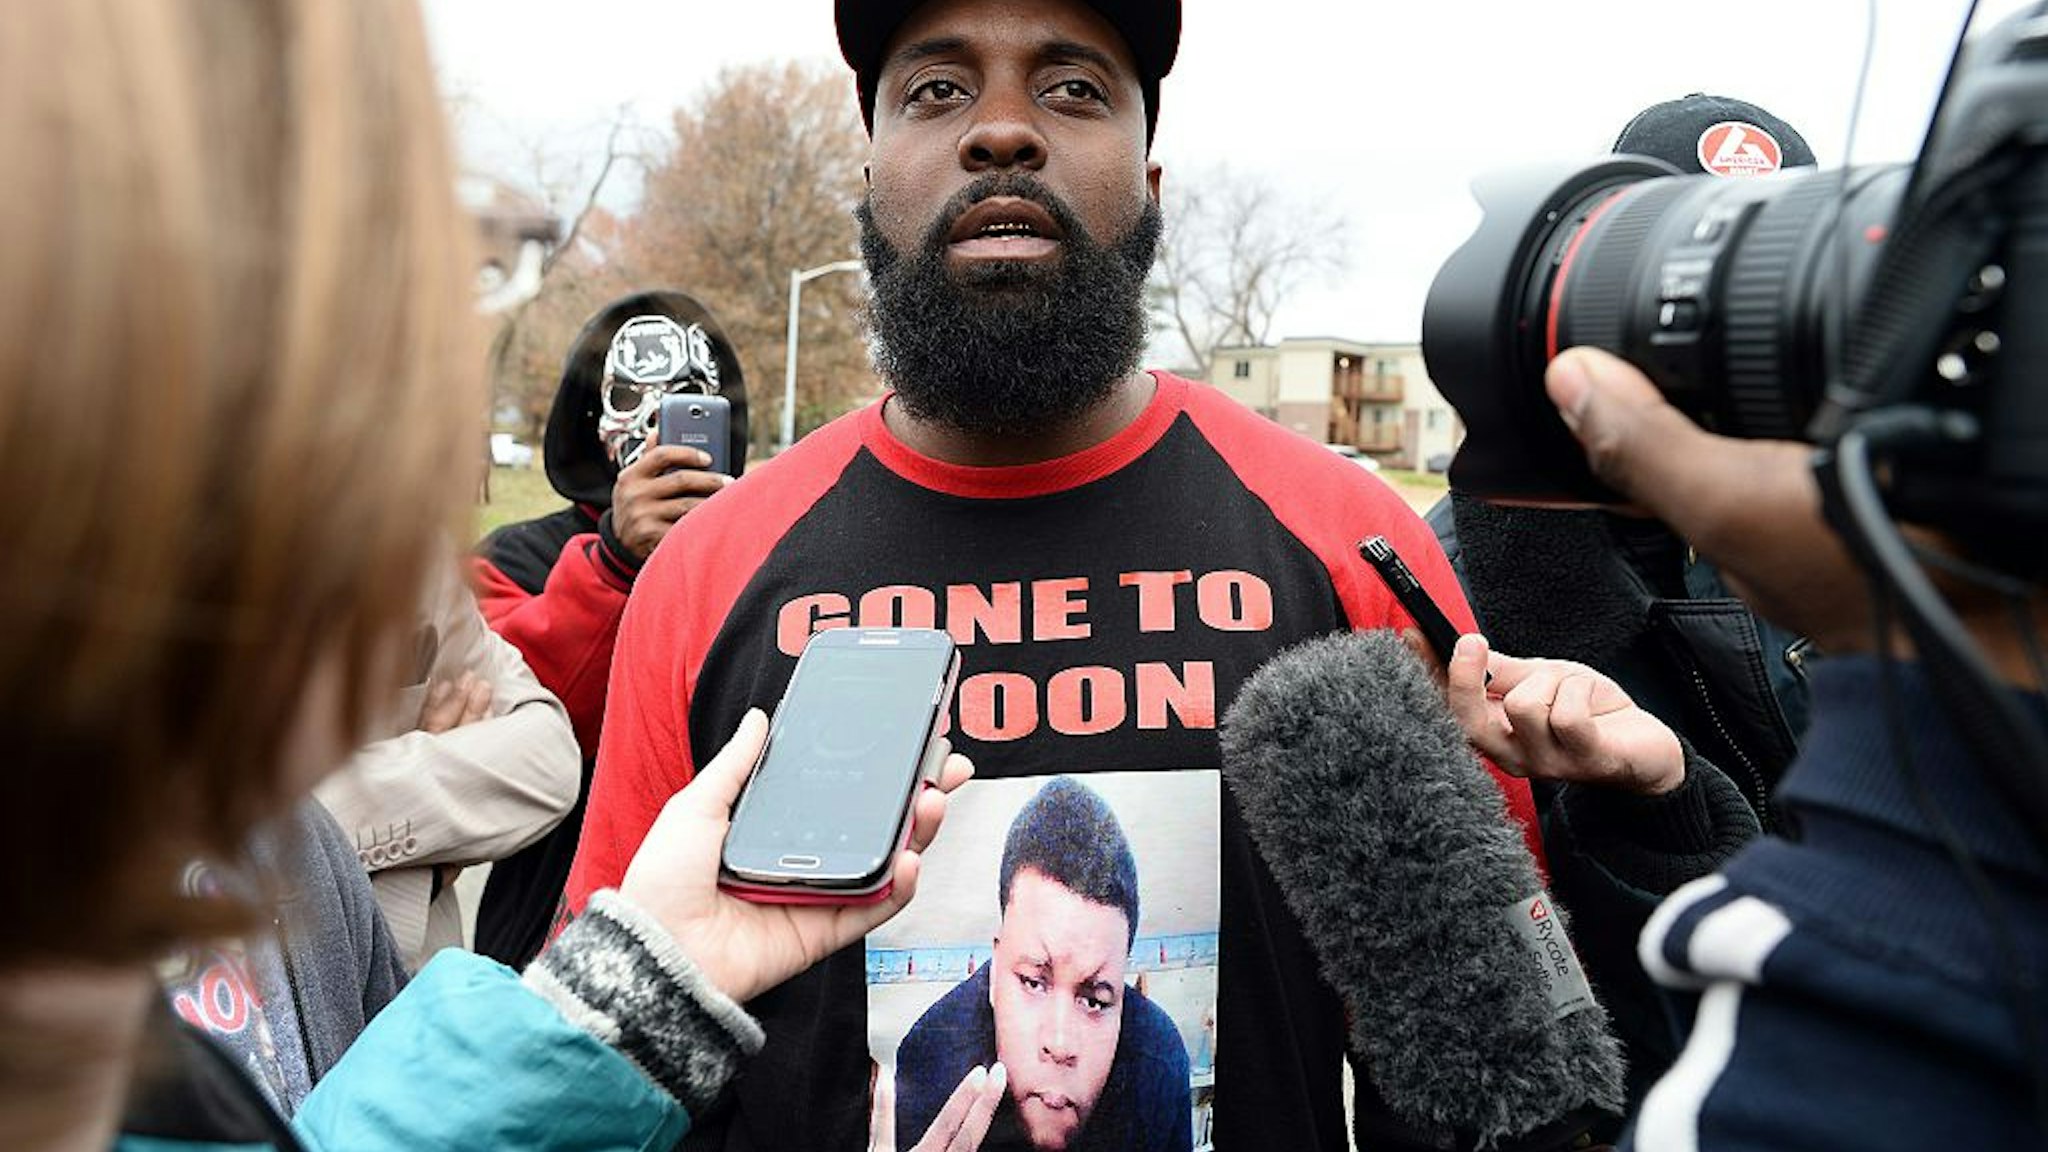 Michael Brown Sr. (C), the father of 18-year-old Michael Brown who was shot dead by a police officer, speaks to journalists as he distributes turkeys for Thanksgiving where his son was killed in Ferguson, Missouri, on November 22, 2014.